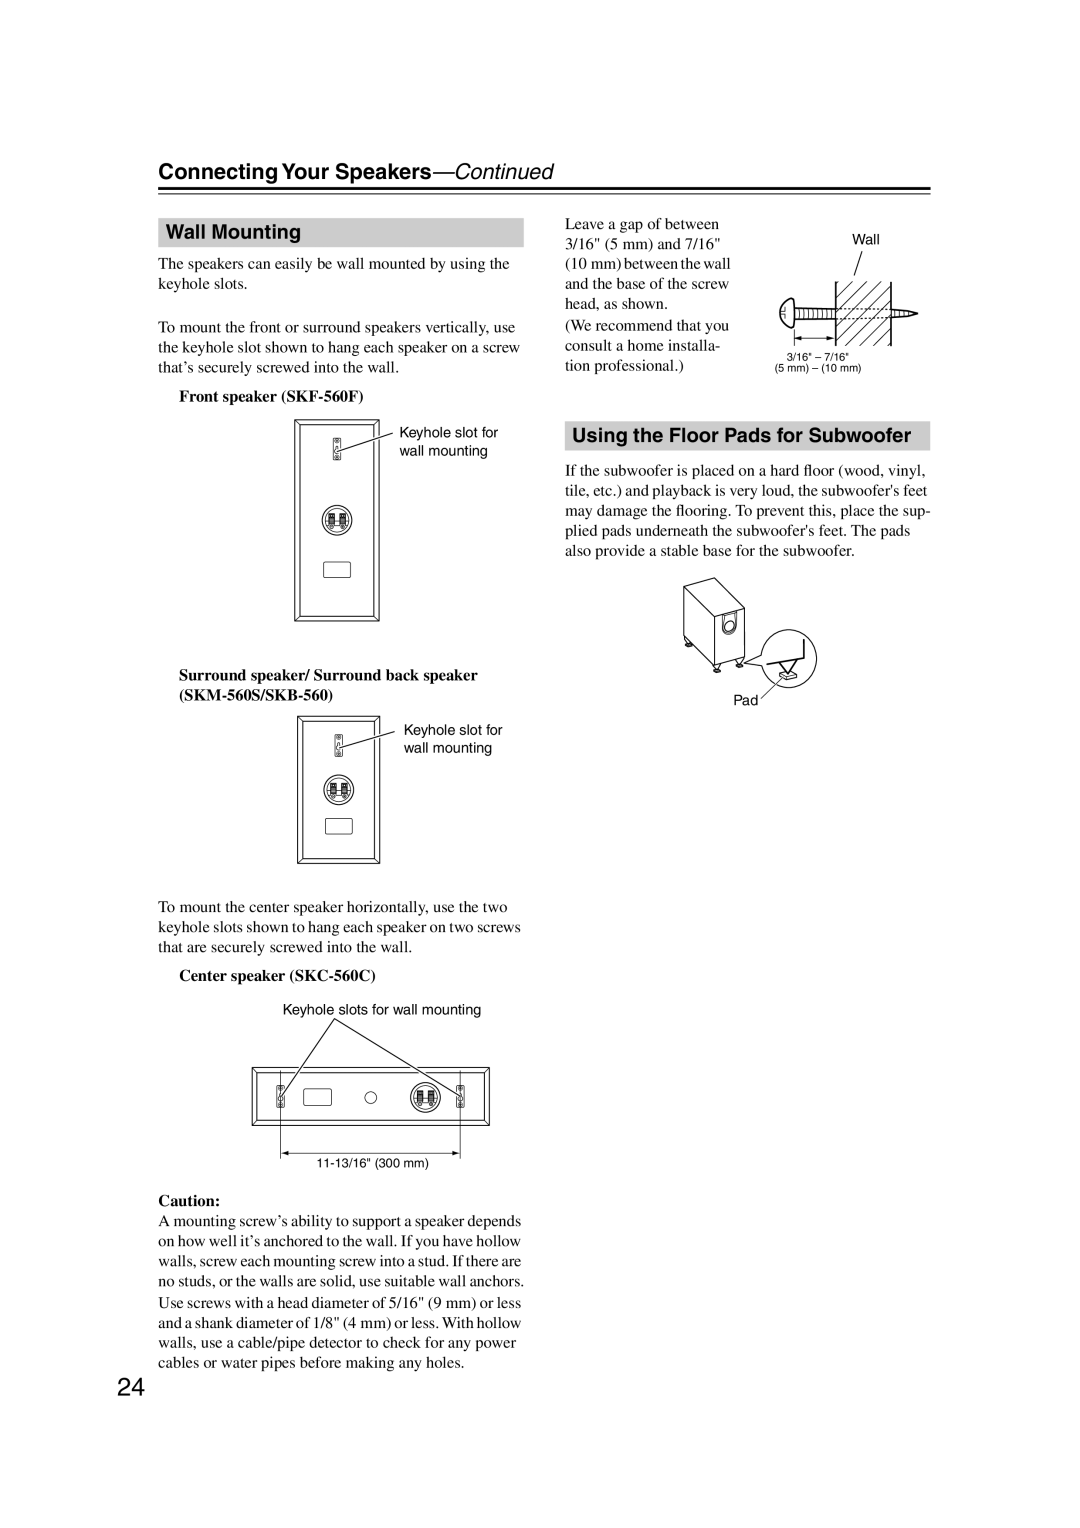 Onkyo HT-S5100 instruction manual Wall Mounting, Using the Floor Pads for Subwoofer, Connecting Your Speakers—Continued 